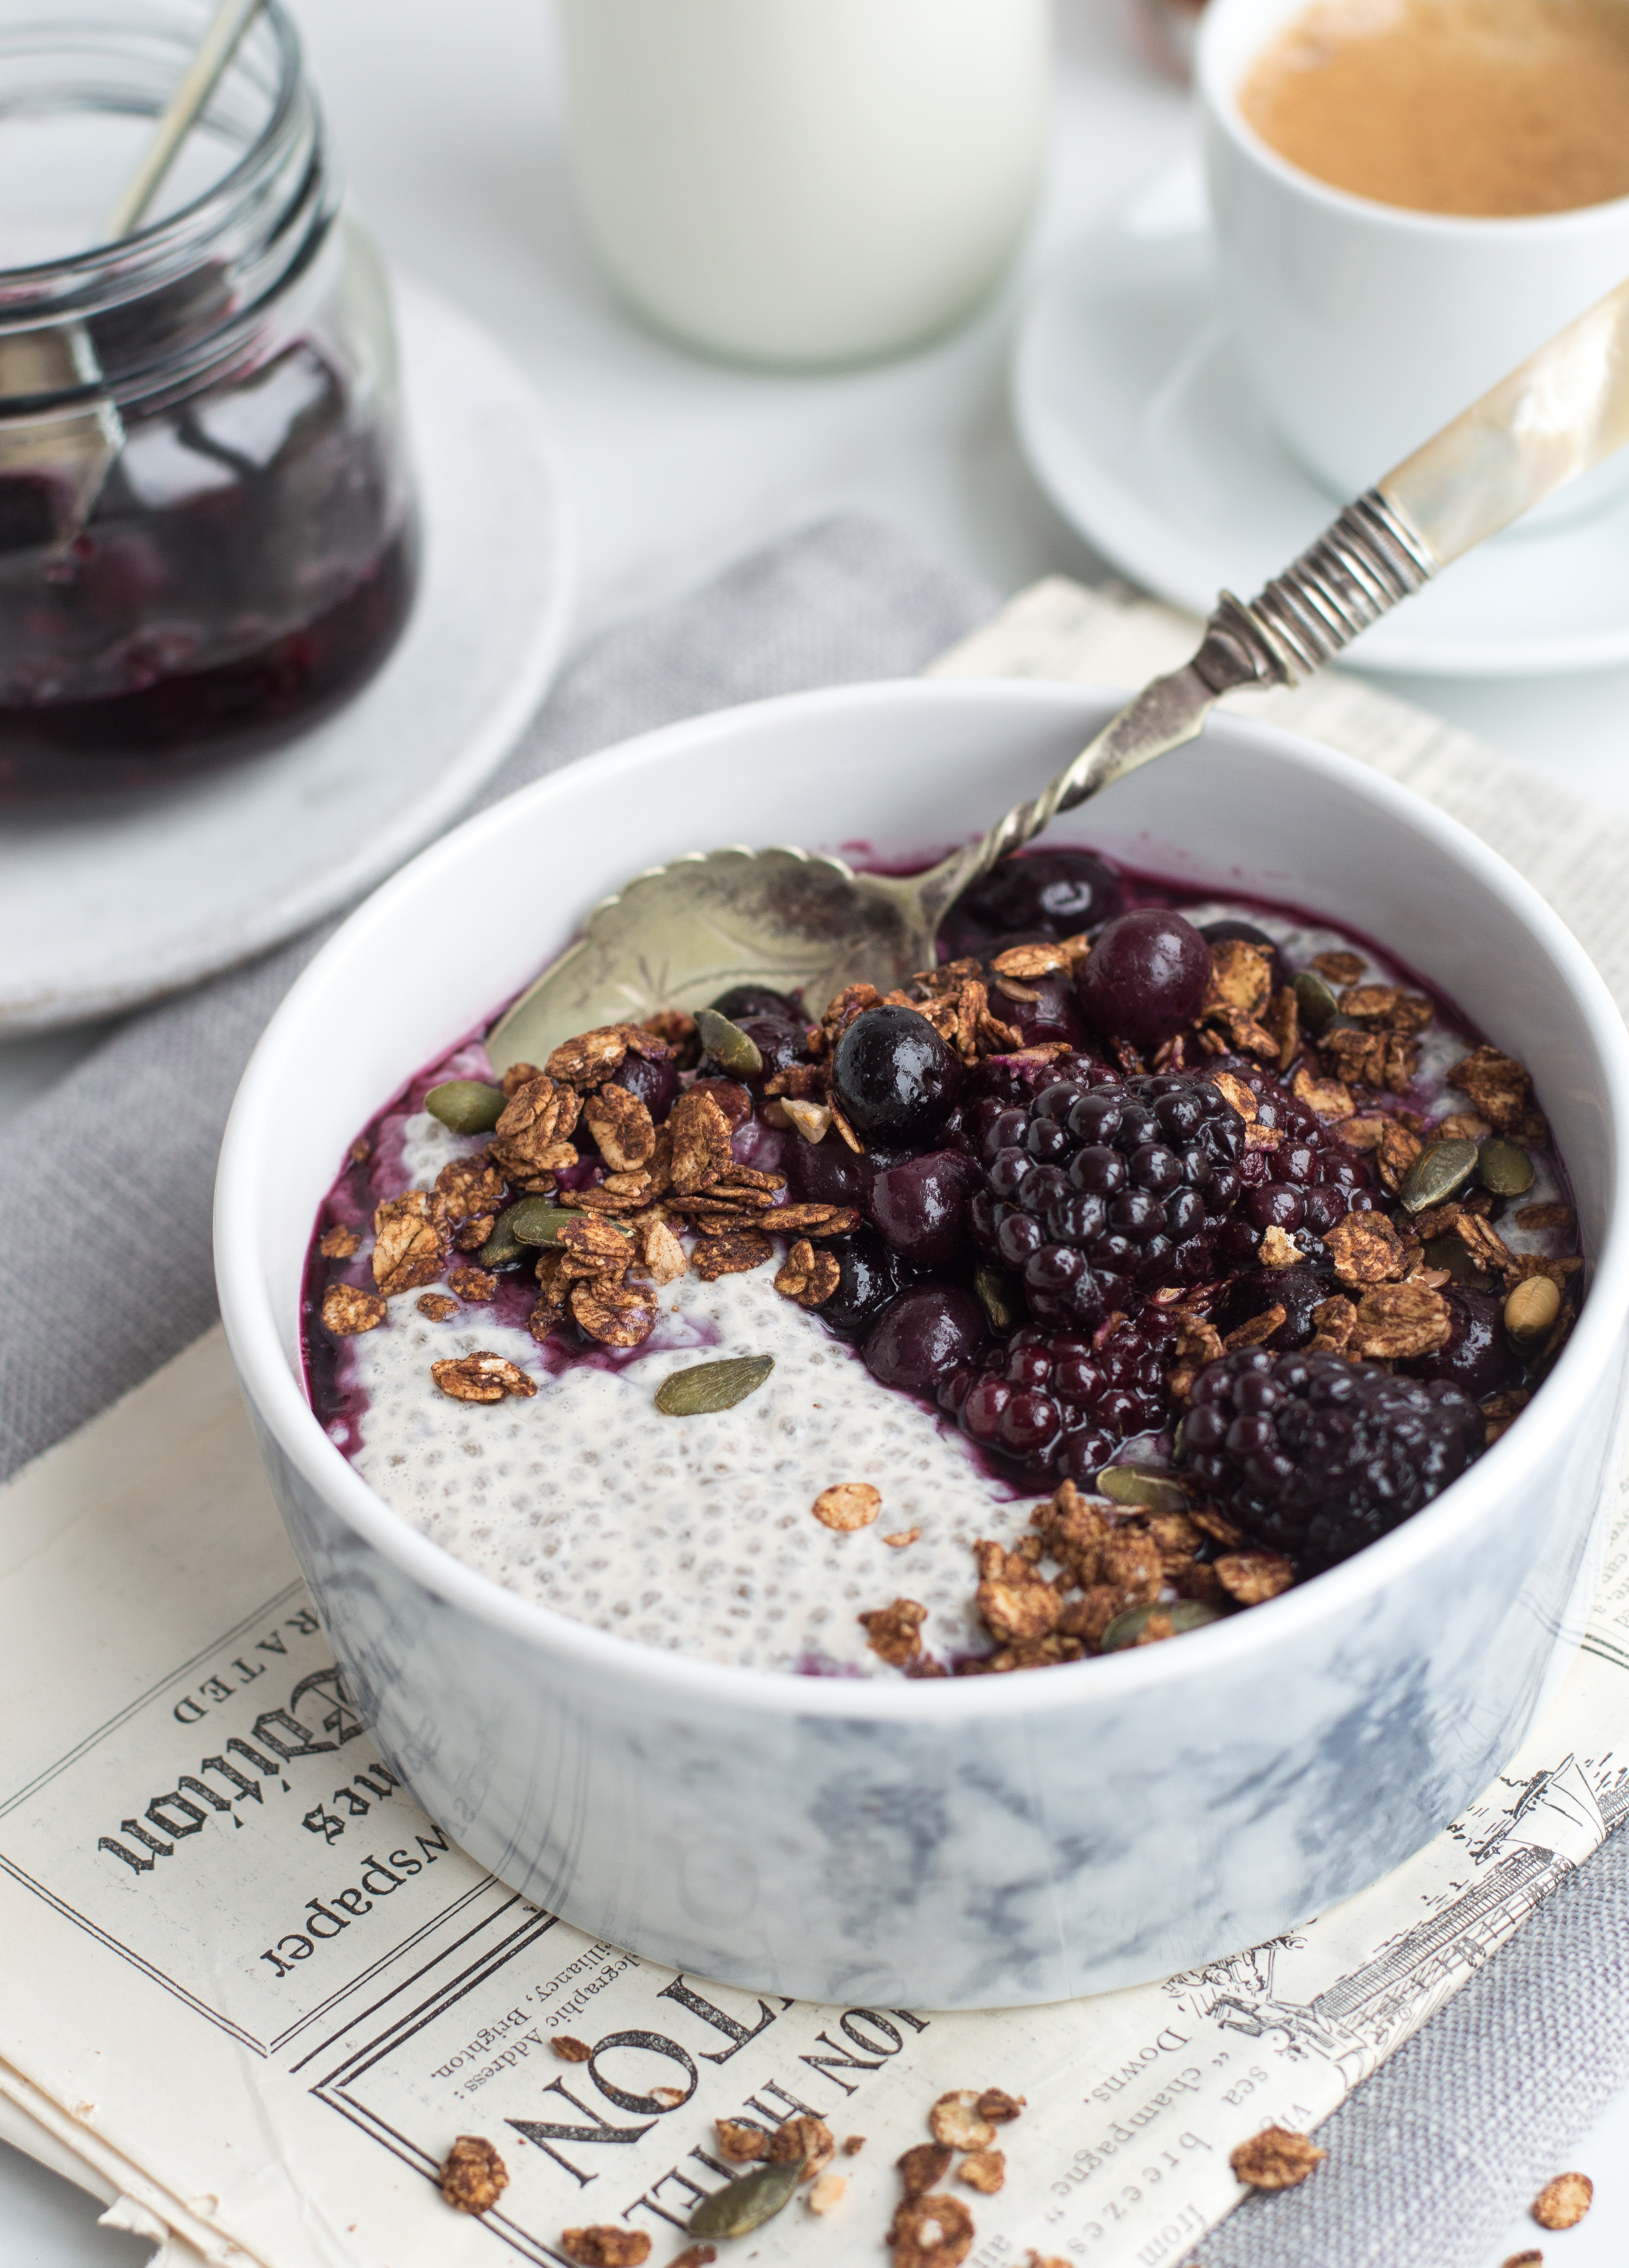 Chia pudding with berry compote & granola